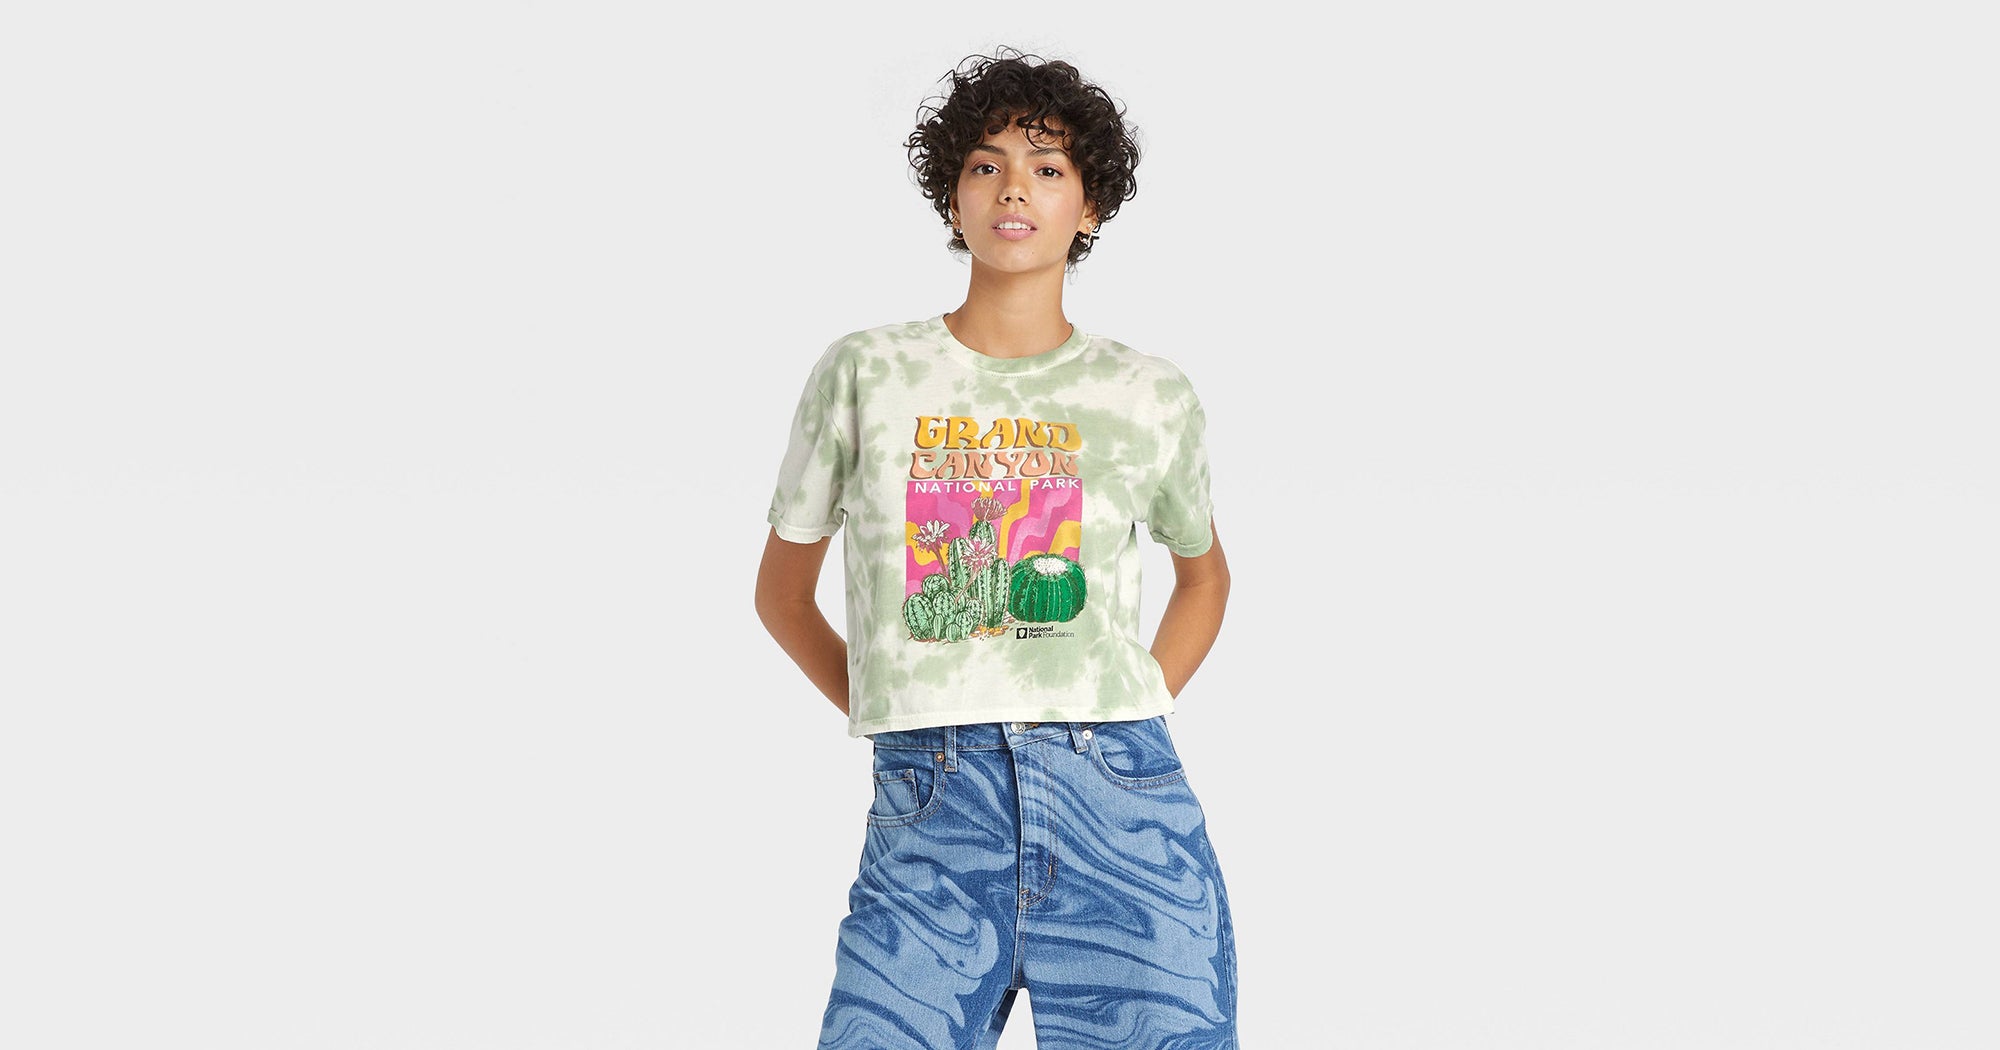 The Best Bad Bunny Target Shirt